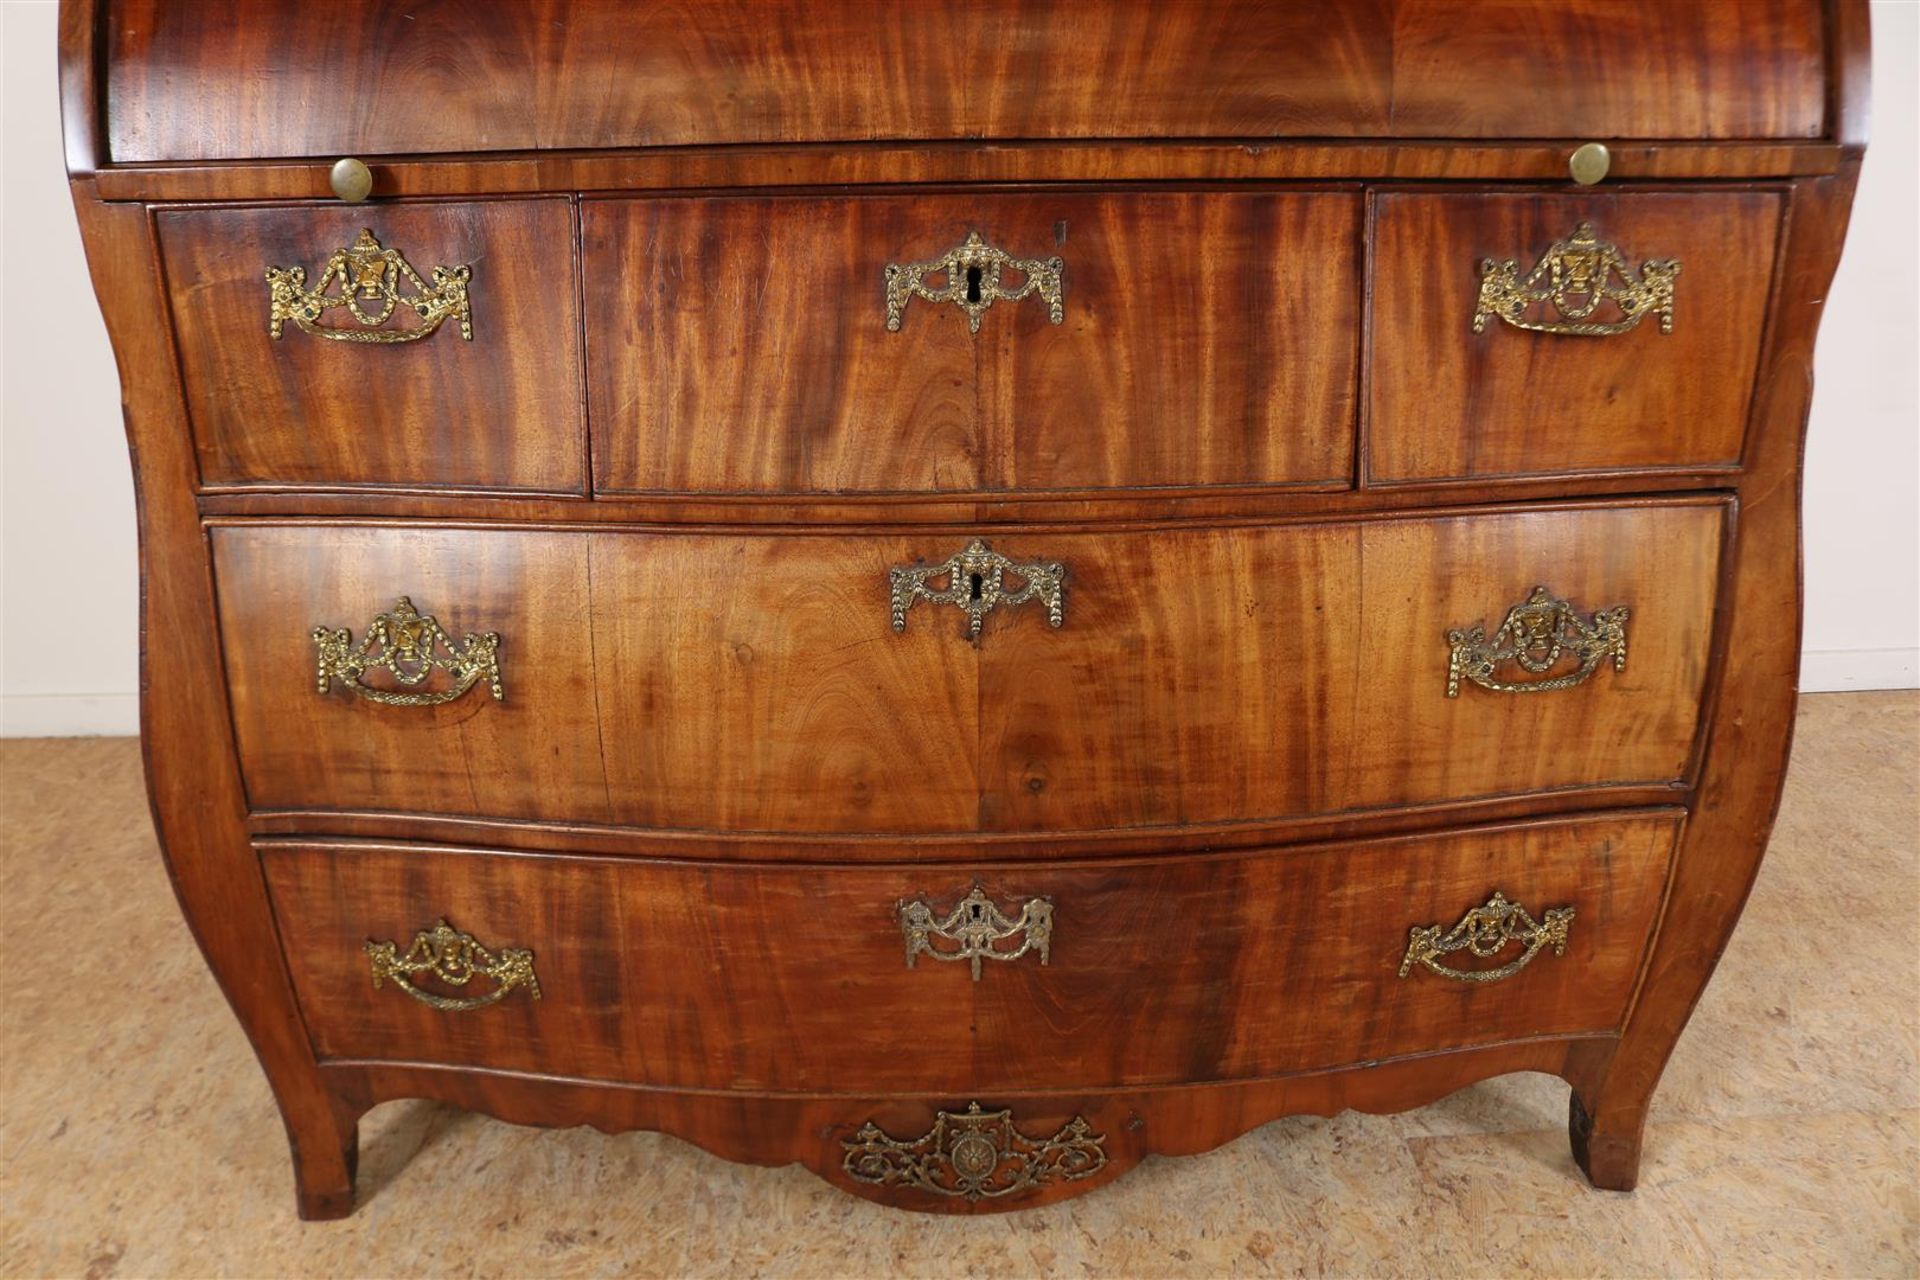 Mahogany Louis XVI, curved cylinder desk, with extendable writing surface, interior with 6 drawers - Image 5 of 6